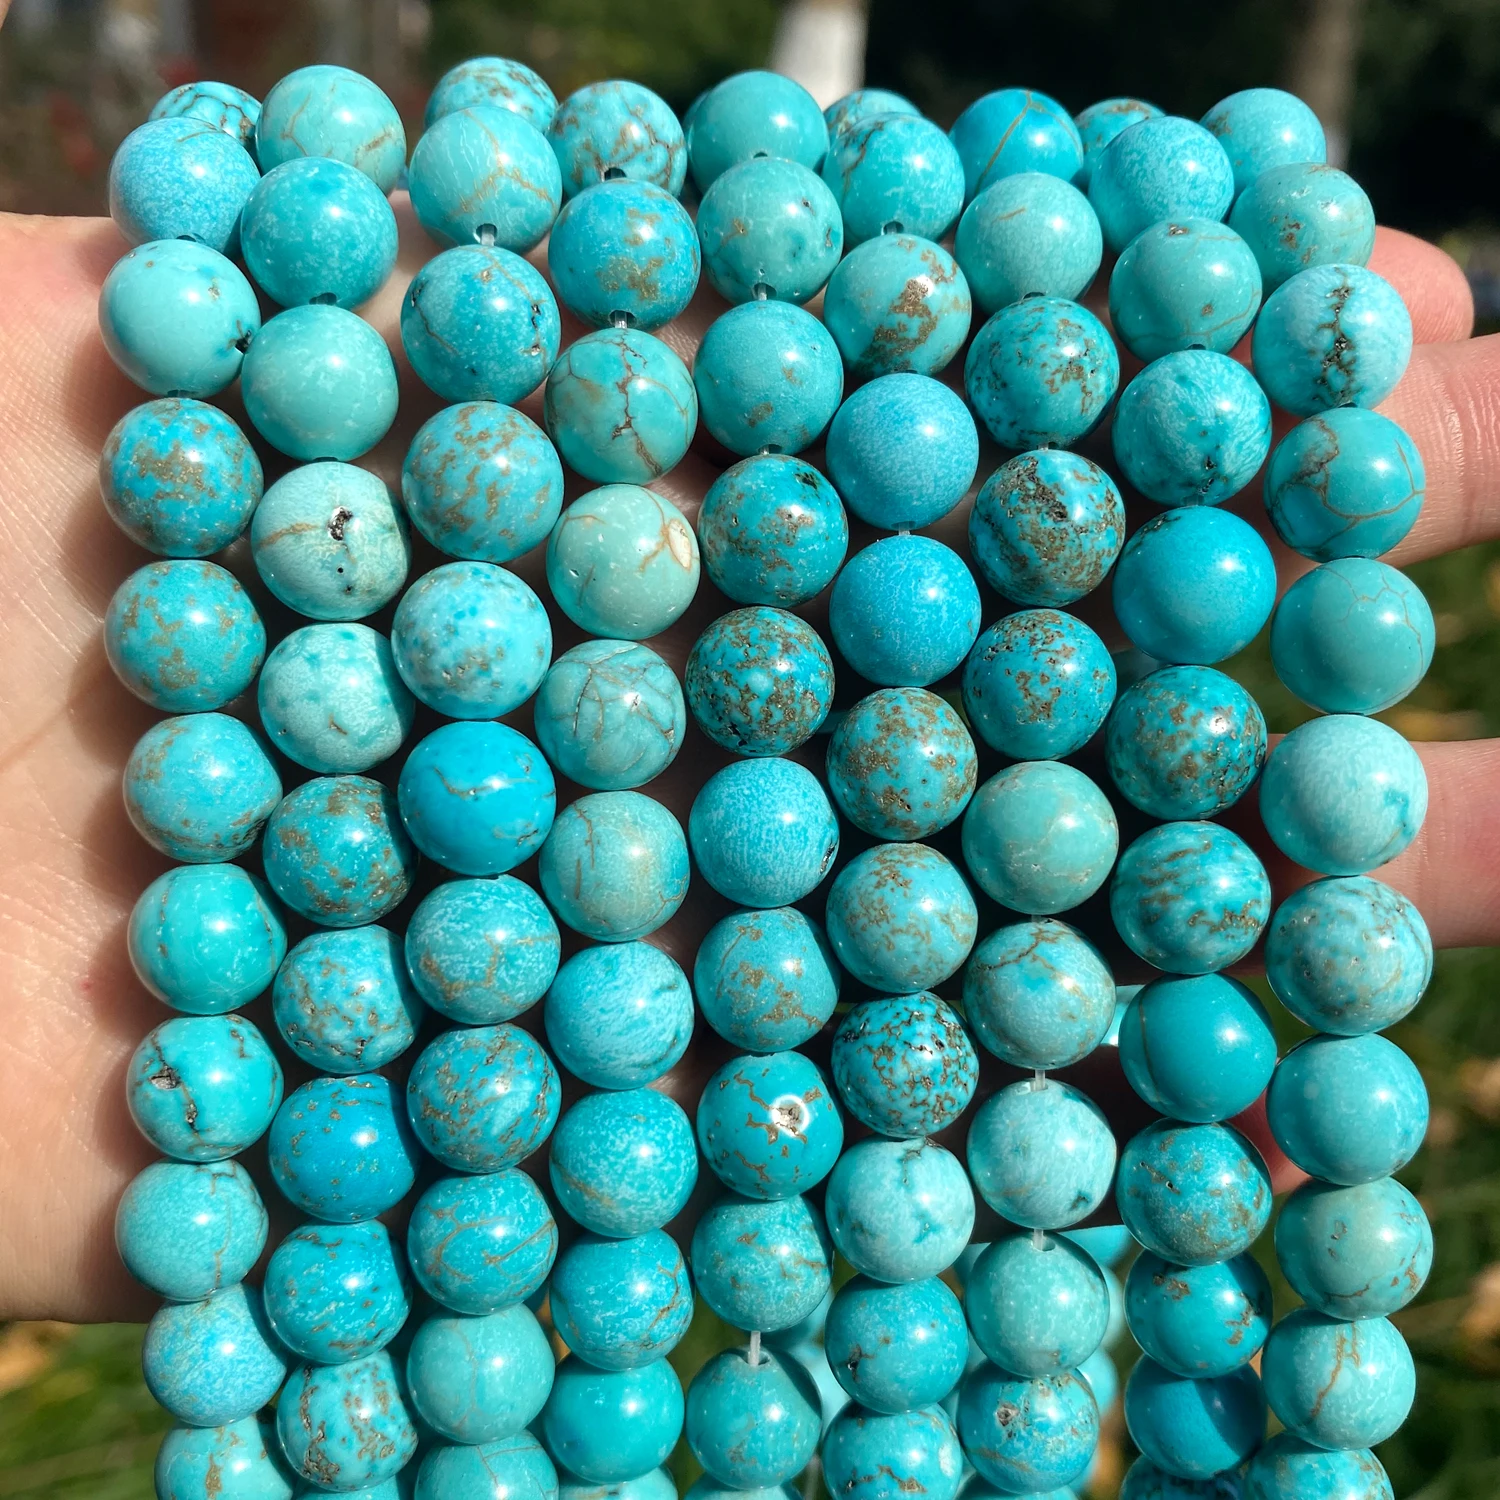 Natural Stone Turquoise Beads for Jewelry Making DIY Earrings Bracelet Necklace 4/6/8/10/12mm Round Loose Spacer Beads 15 inches